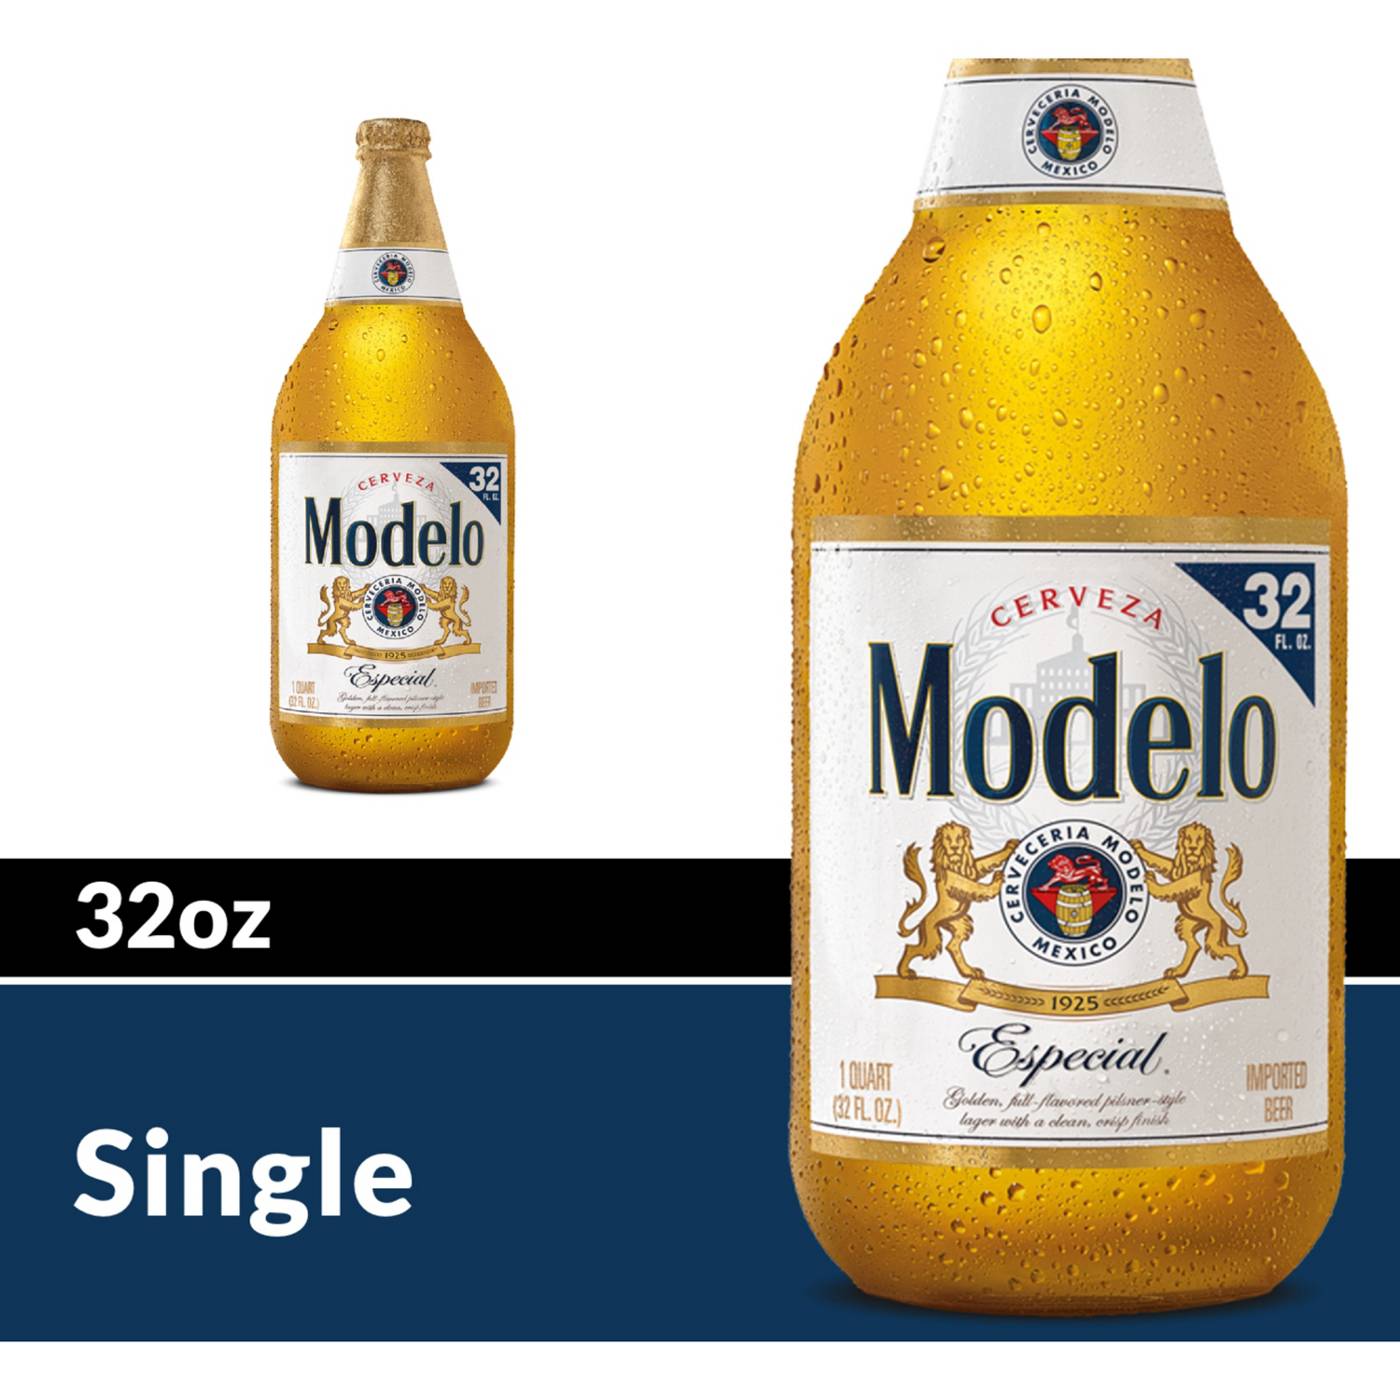 Modelo Especial Mexican Lager Import Beer 32 oz Bottle; image 3 of 10